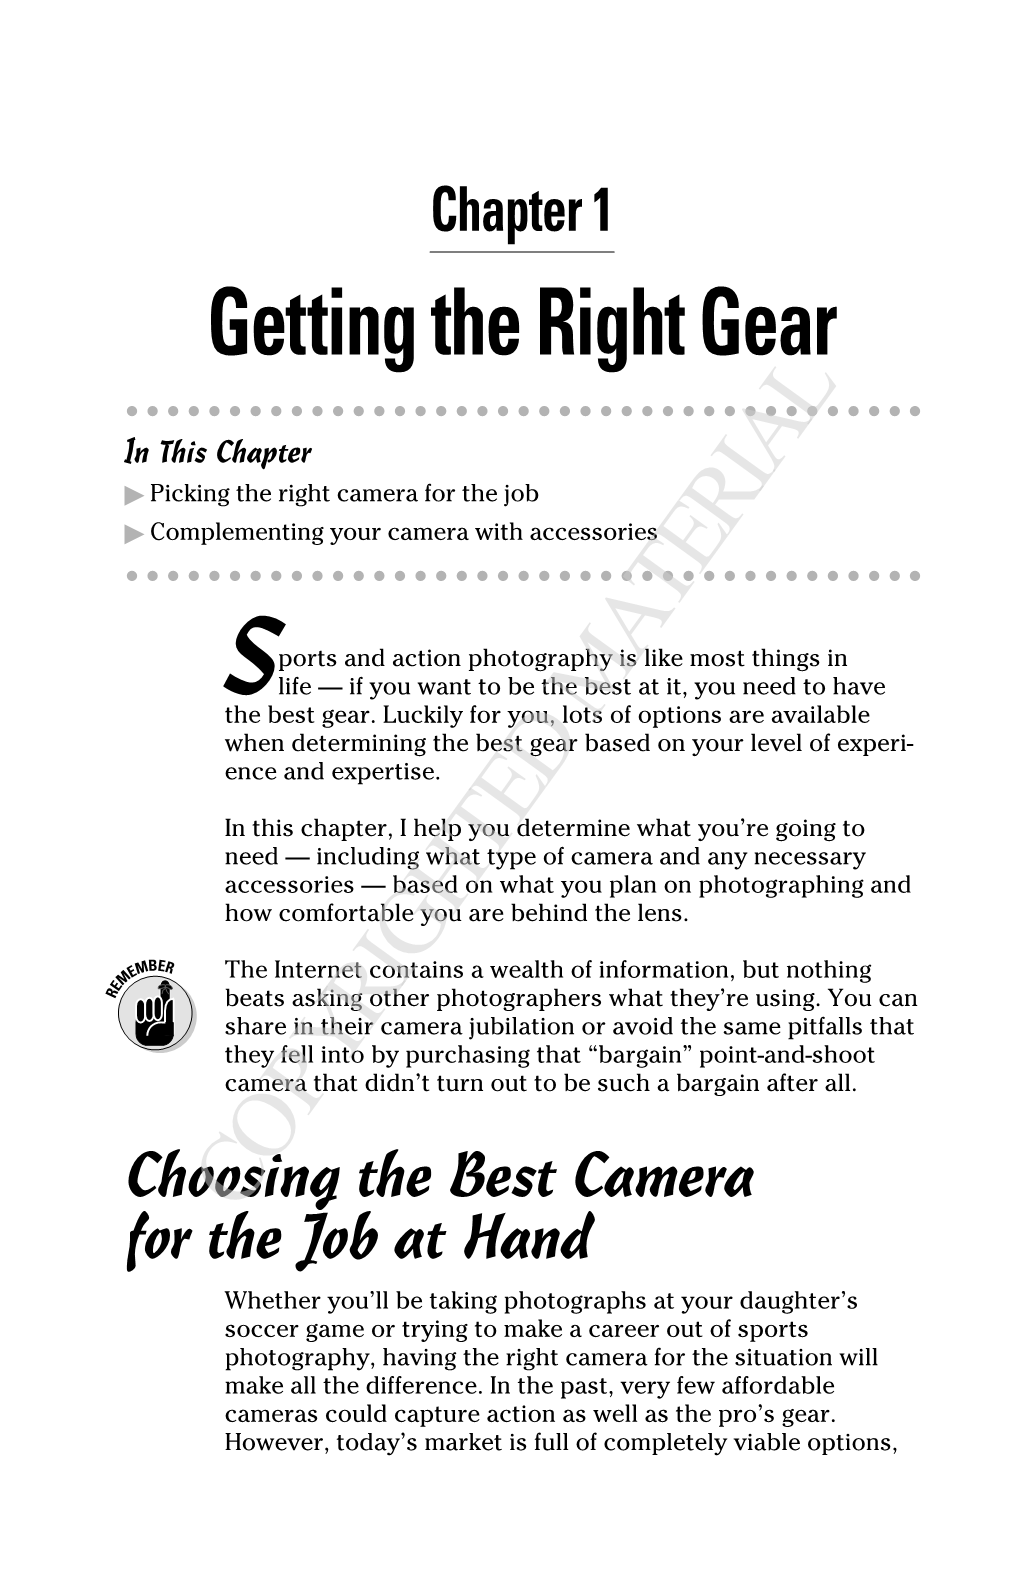 Getting the Right Gear